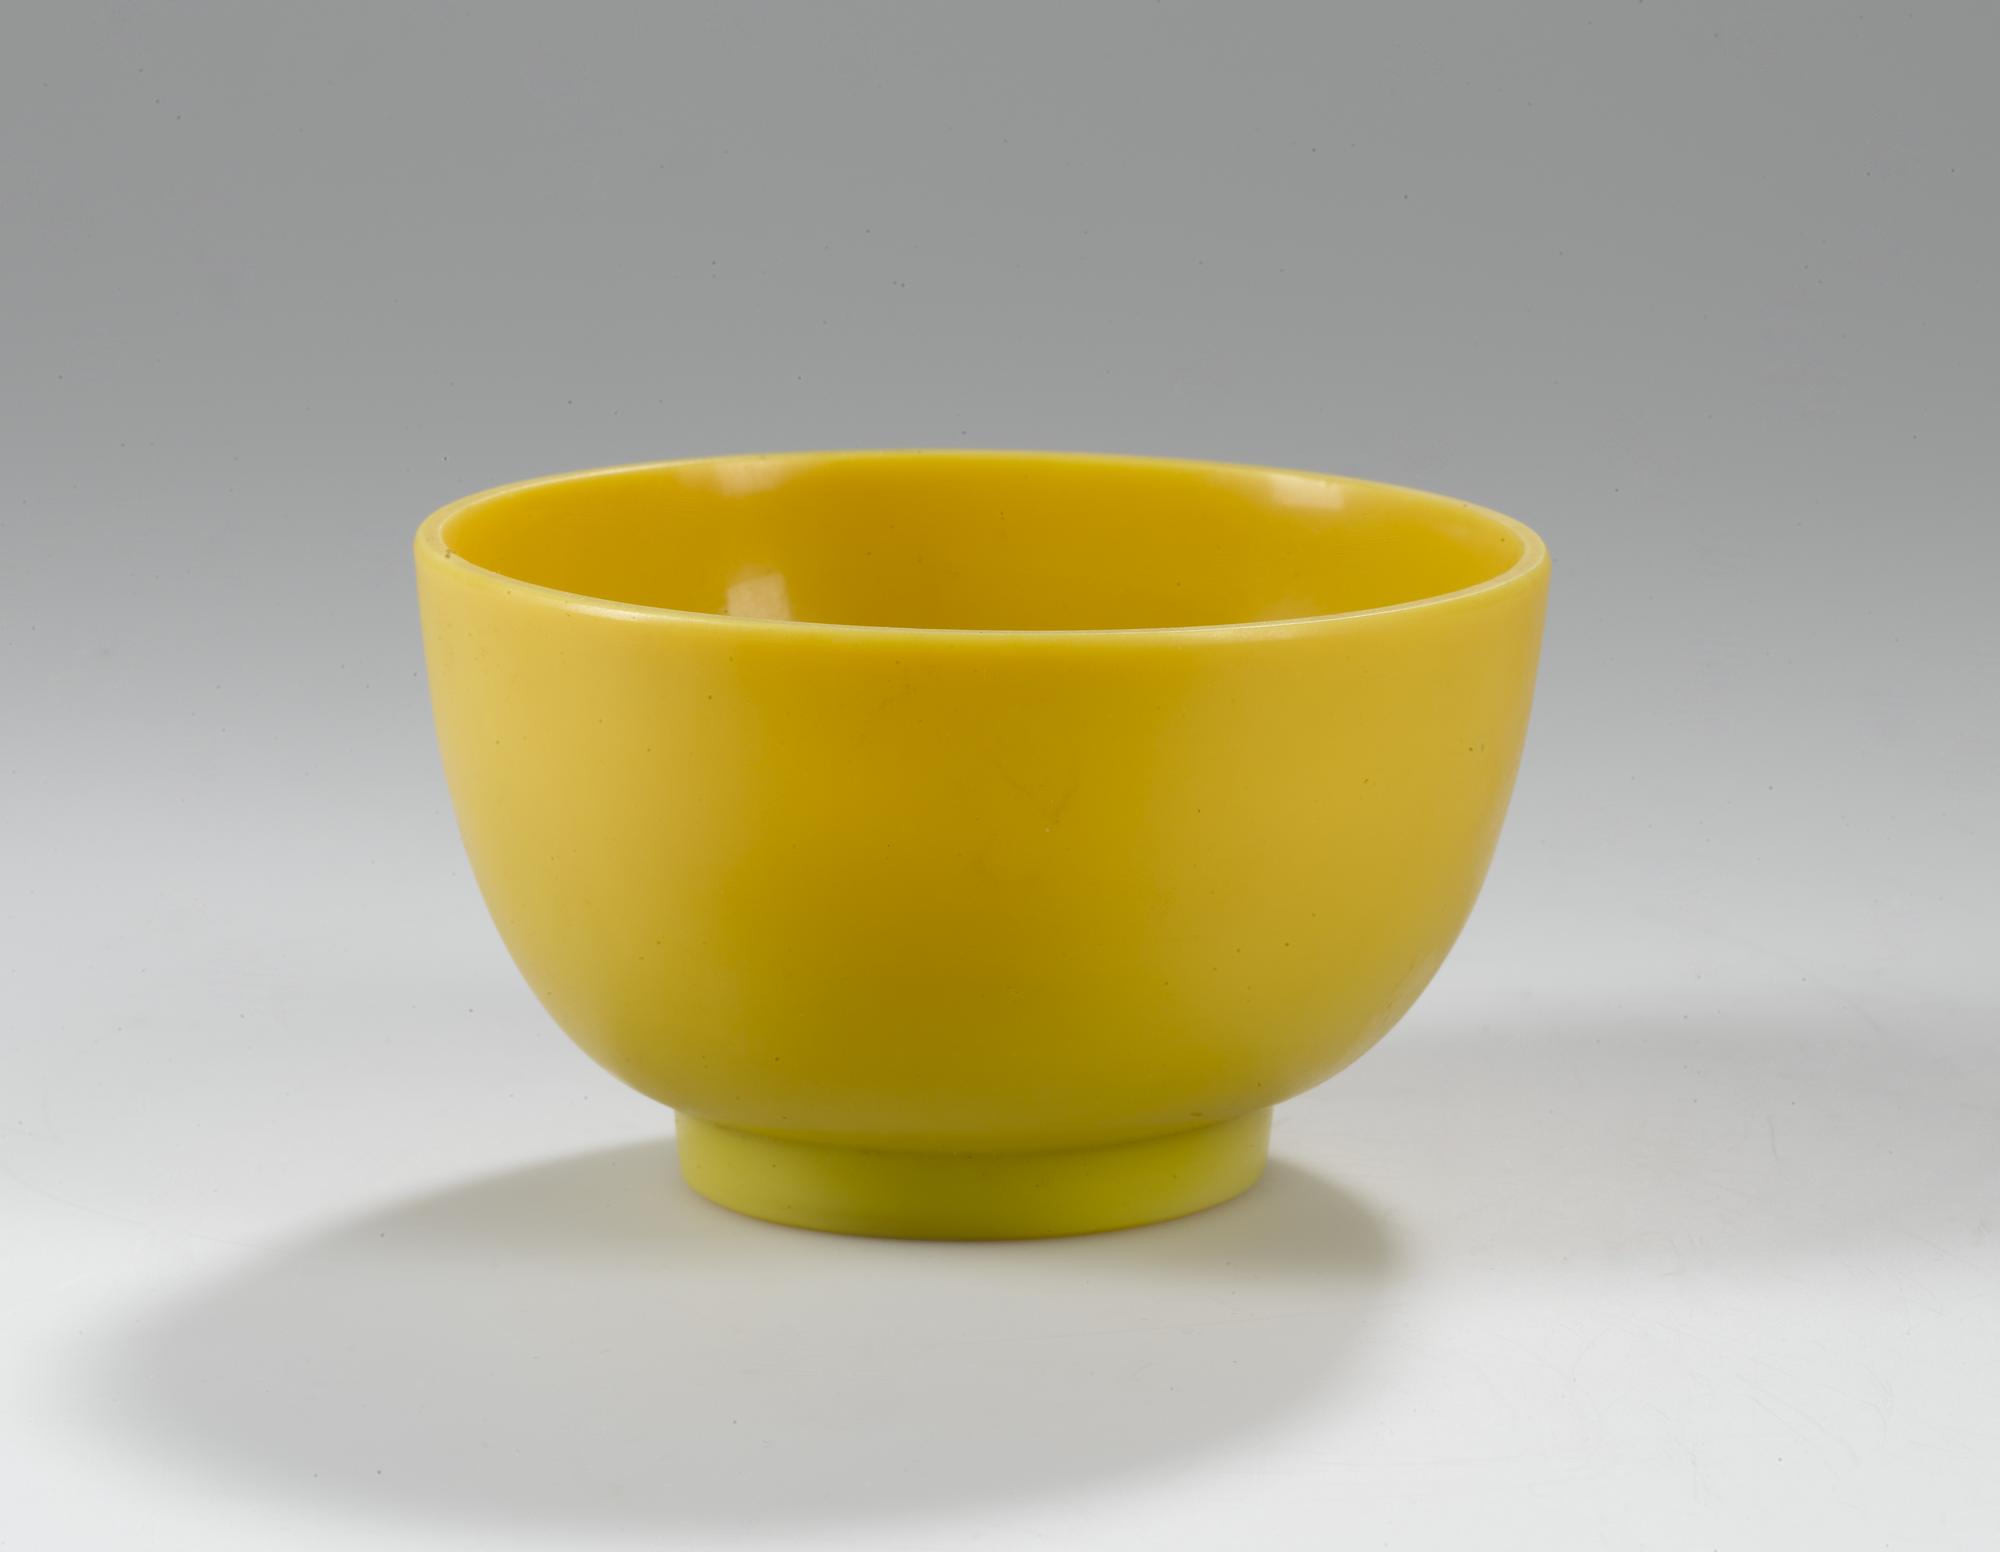 Bowl of imperial yellow glass, one of a pair: China, Qing Dynasty, Qianlong reign, 1736-1795 AD.